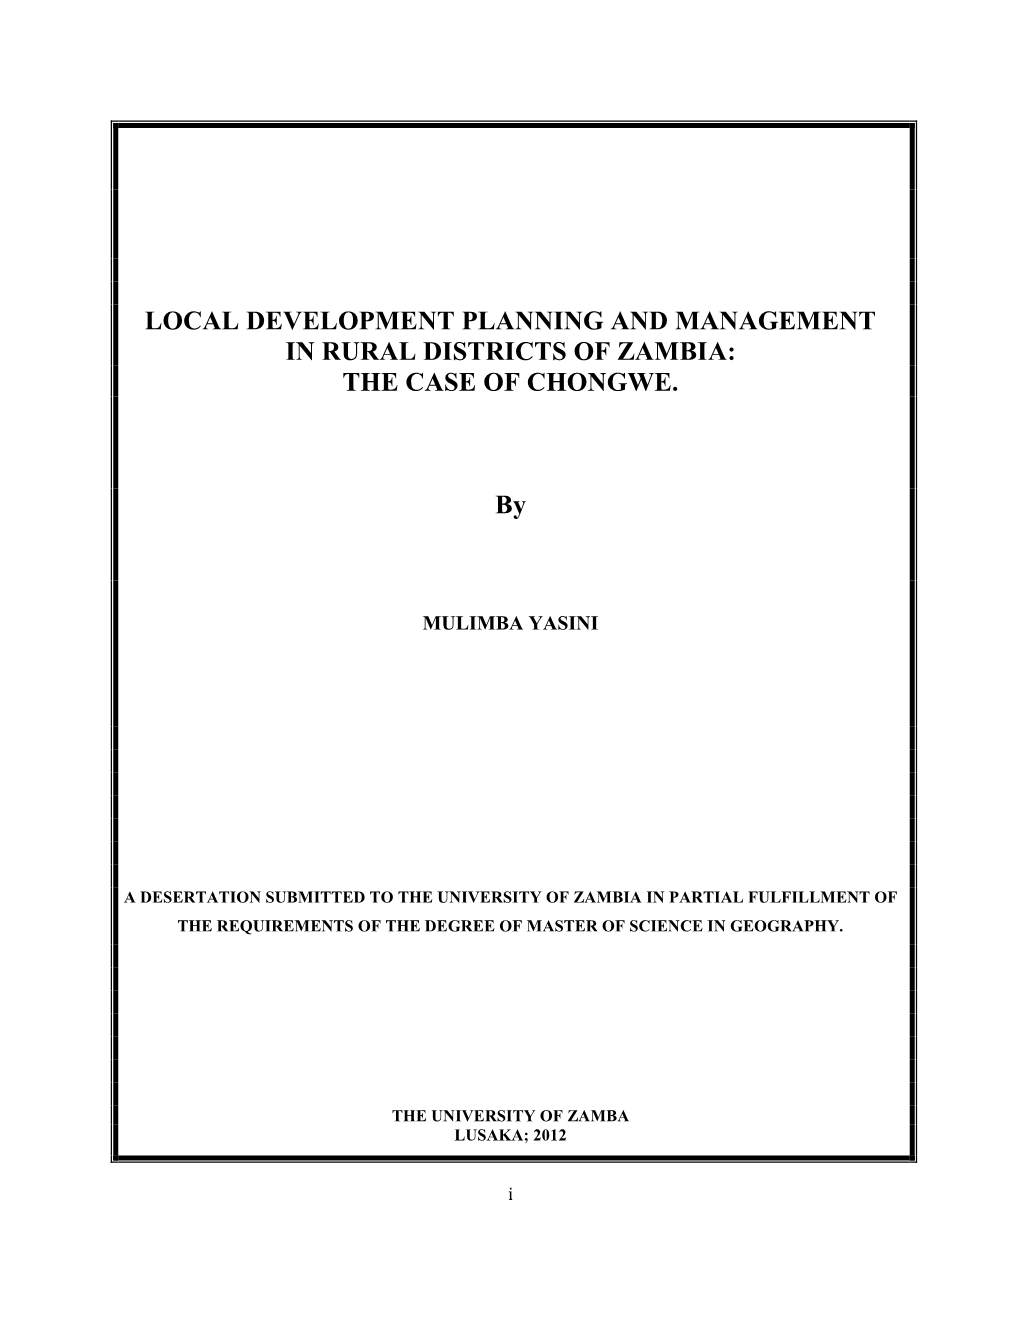 Local Development Planning and Management in Rural Districts of Zambia: the Case of Chongwe